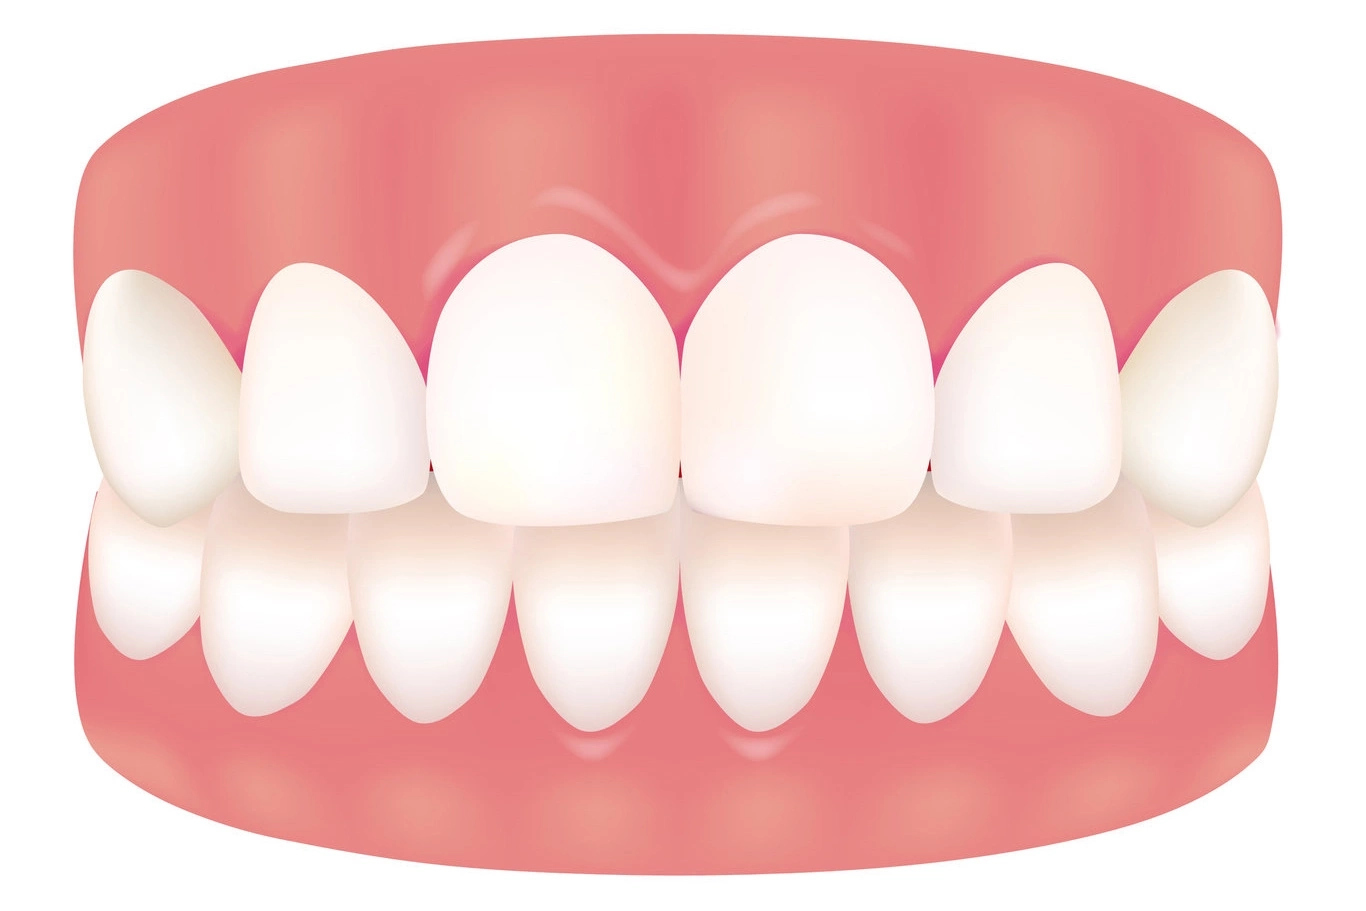 How to Care for the Teeth and Gums